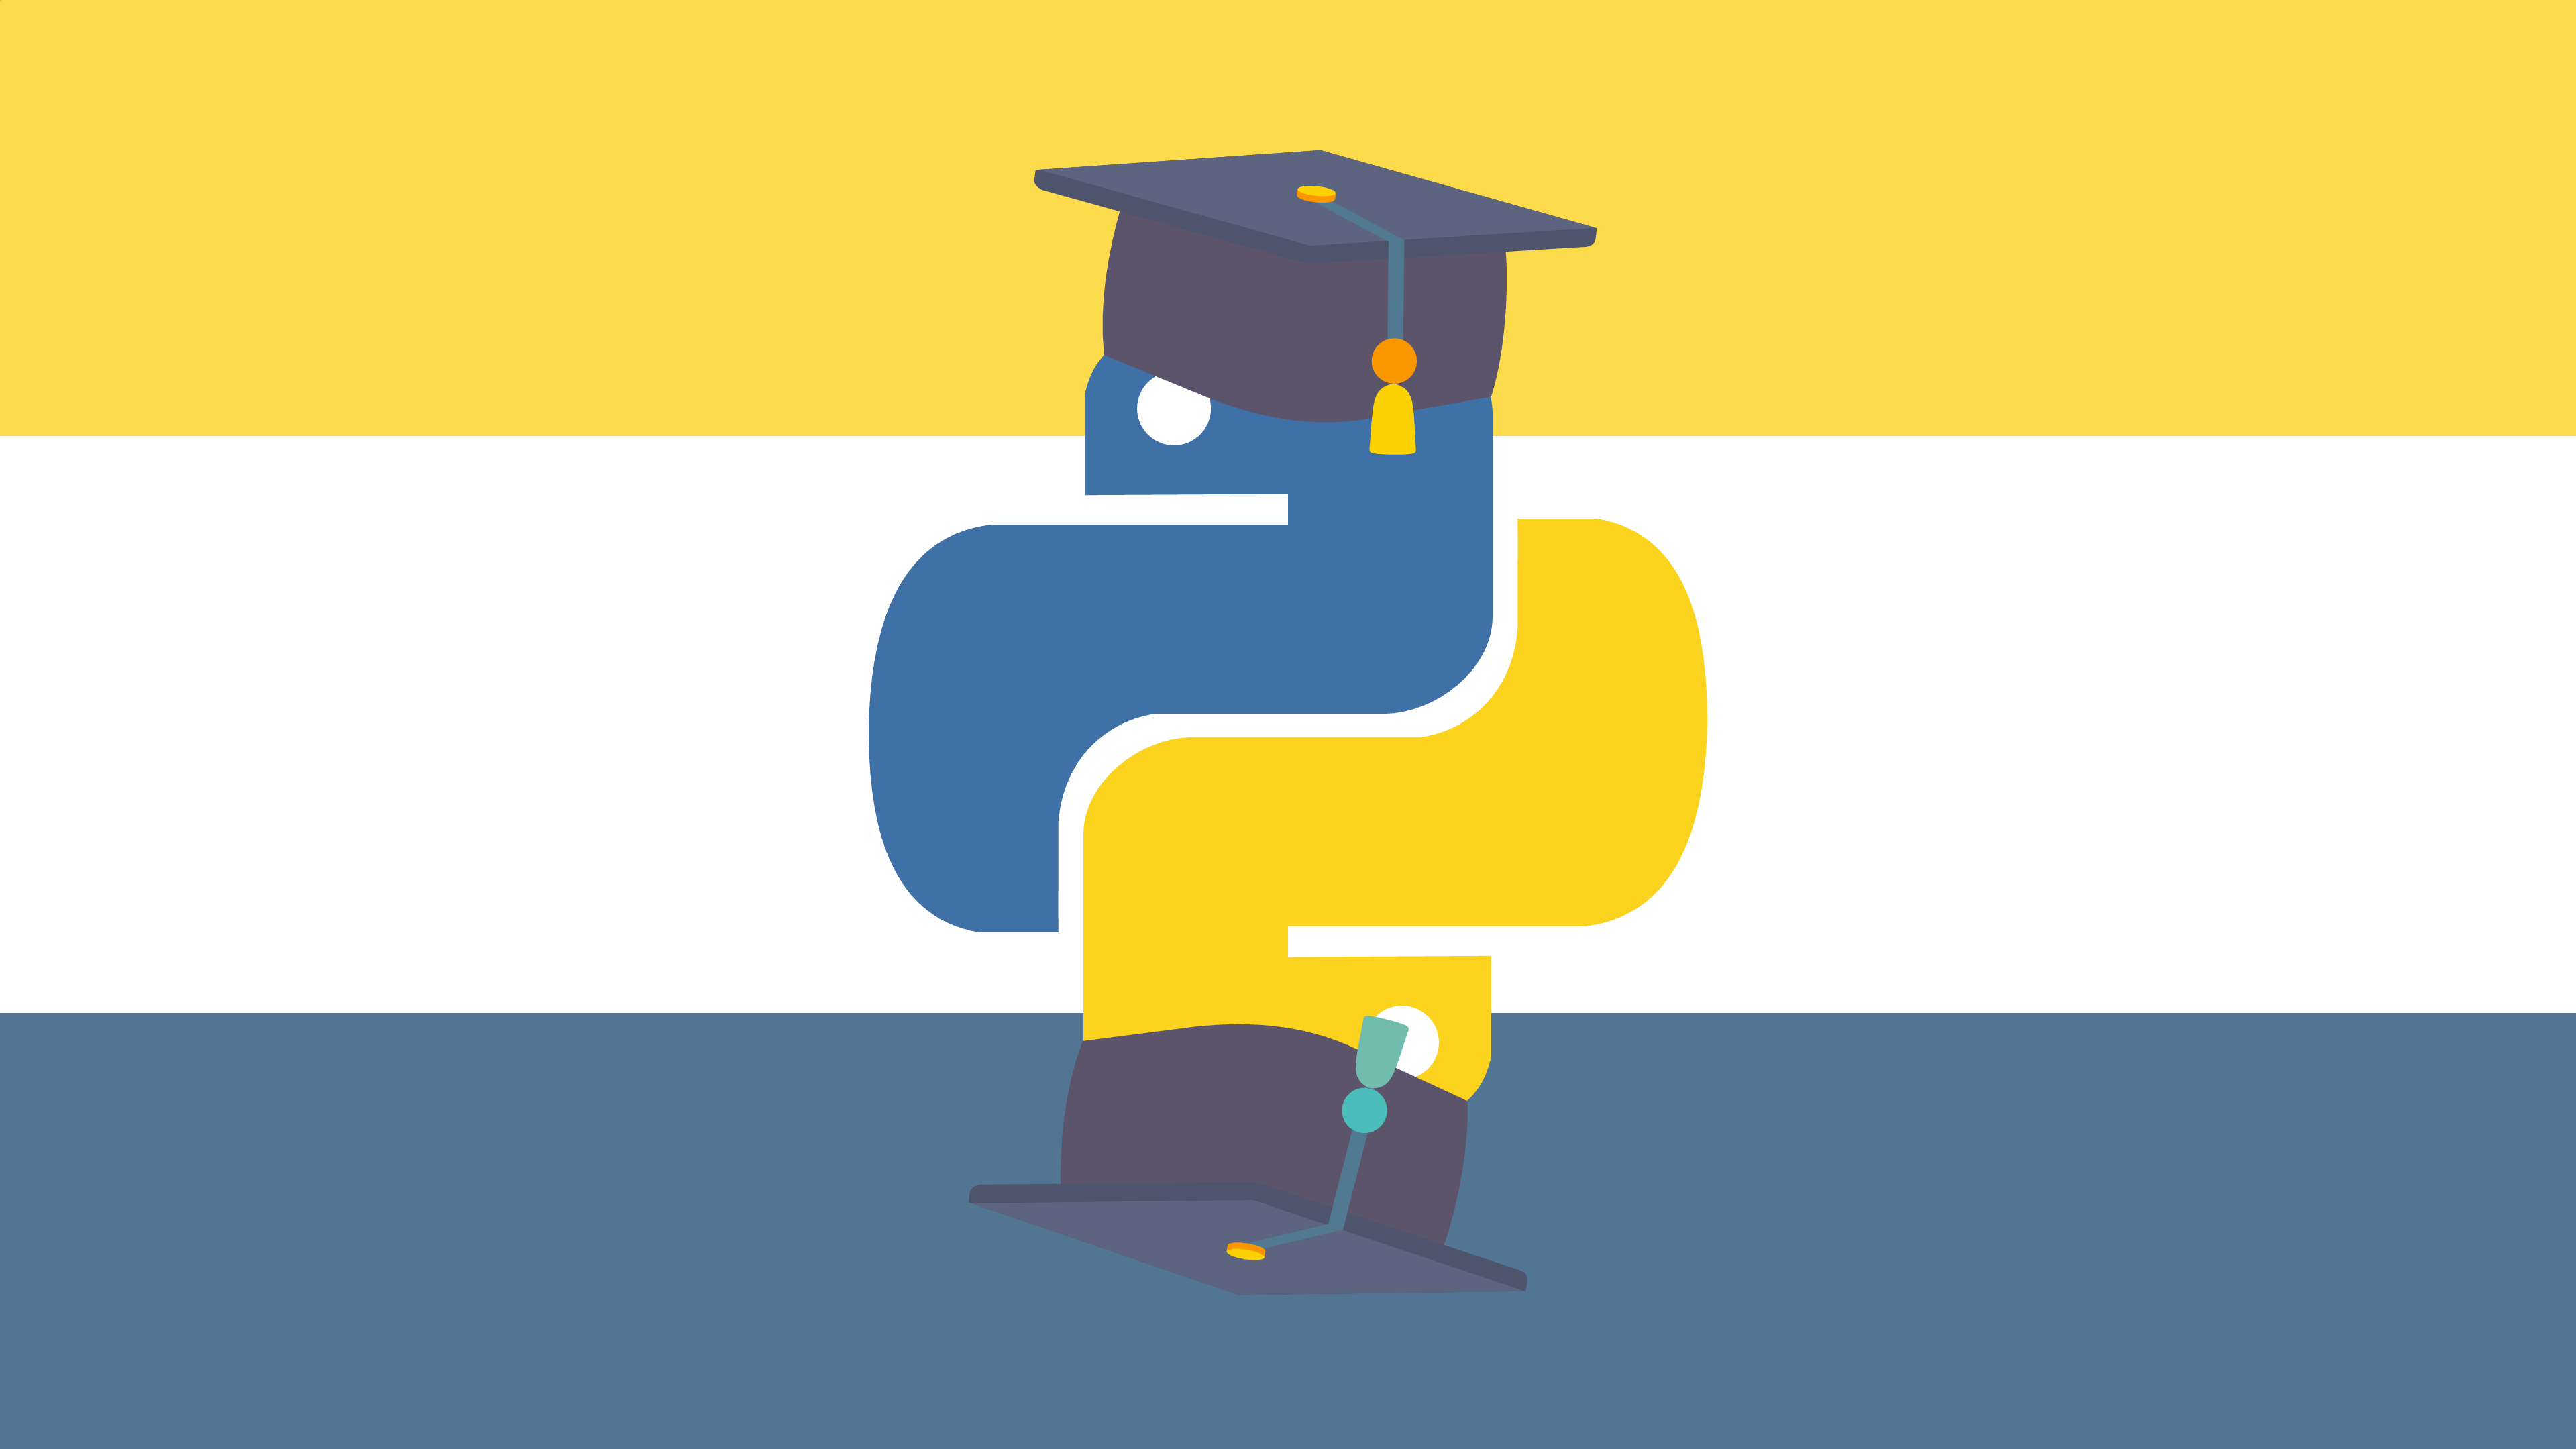 Python logo with graduate caps on the snakes’ heads